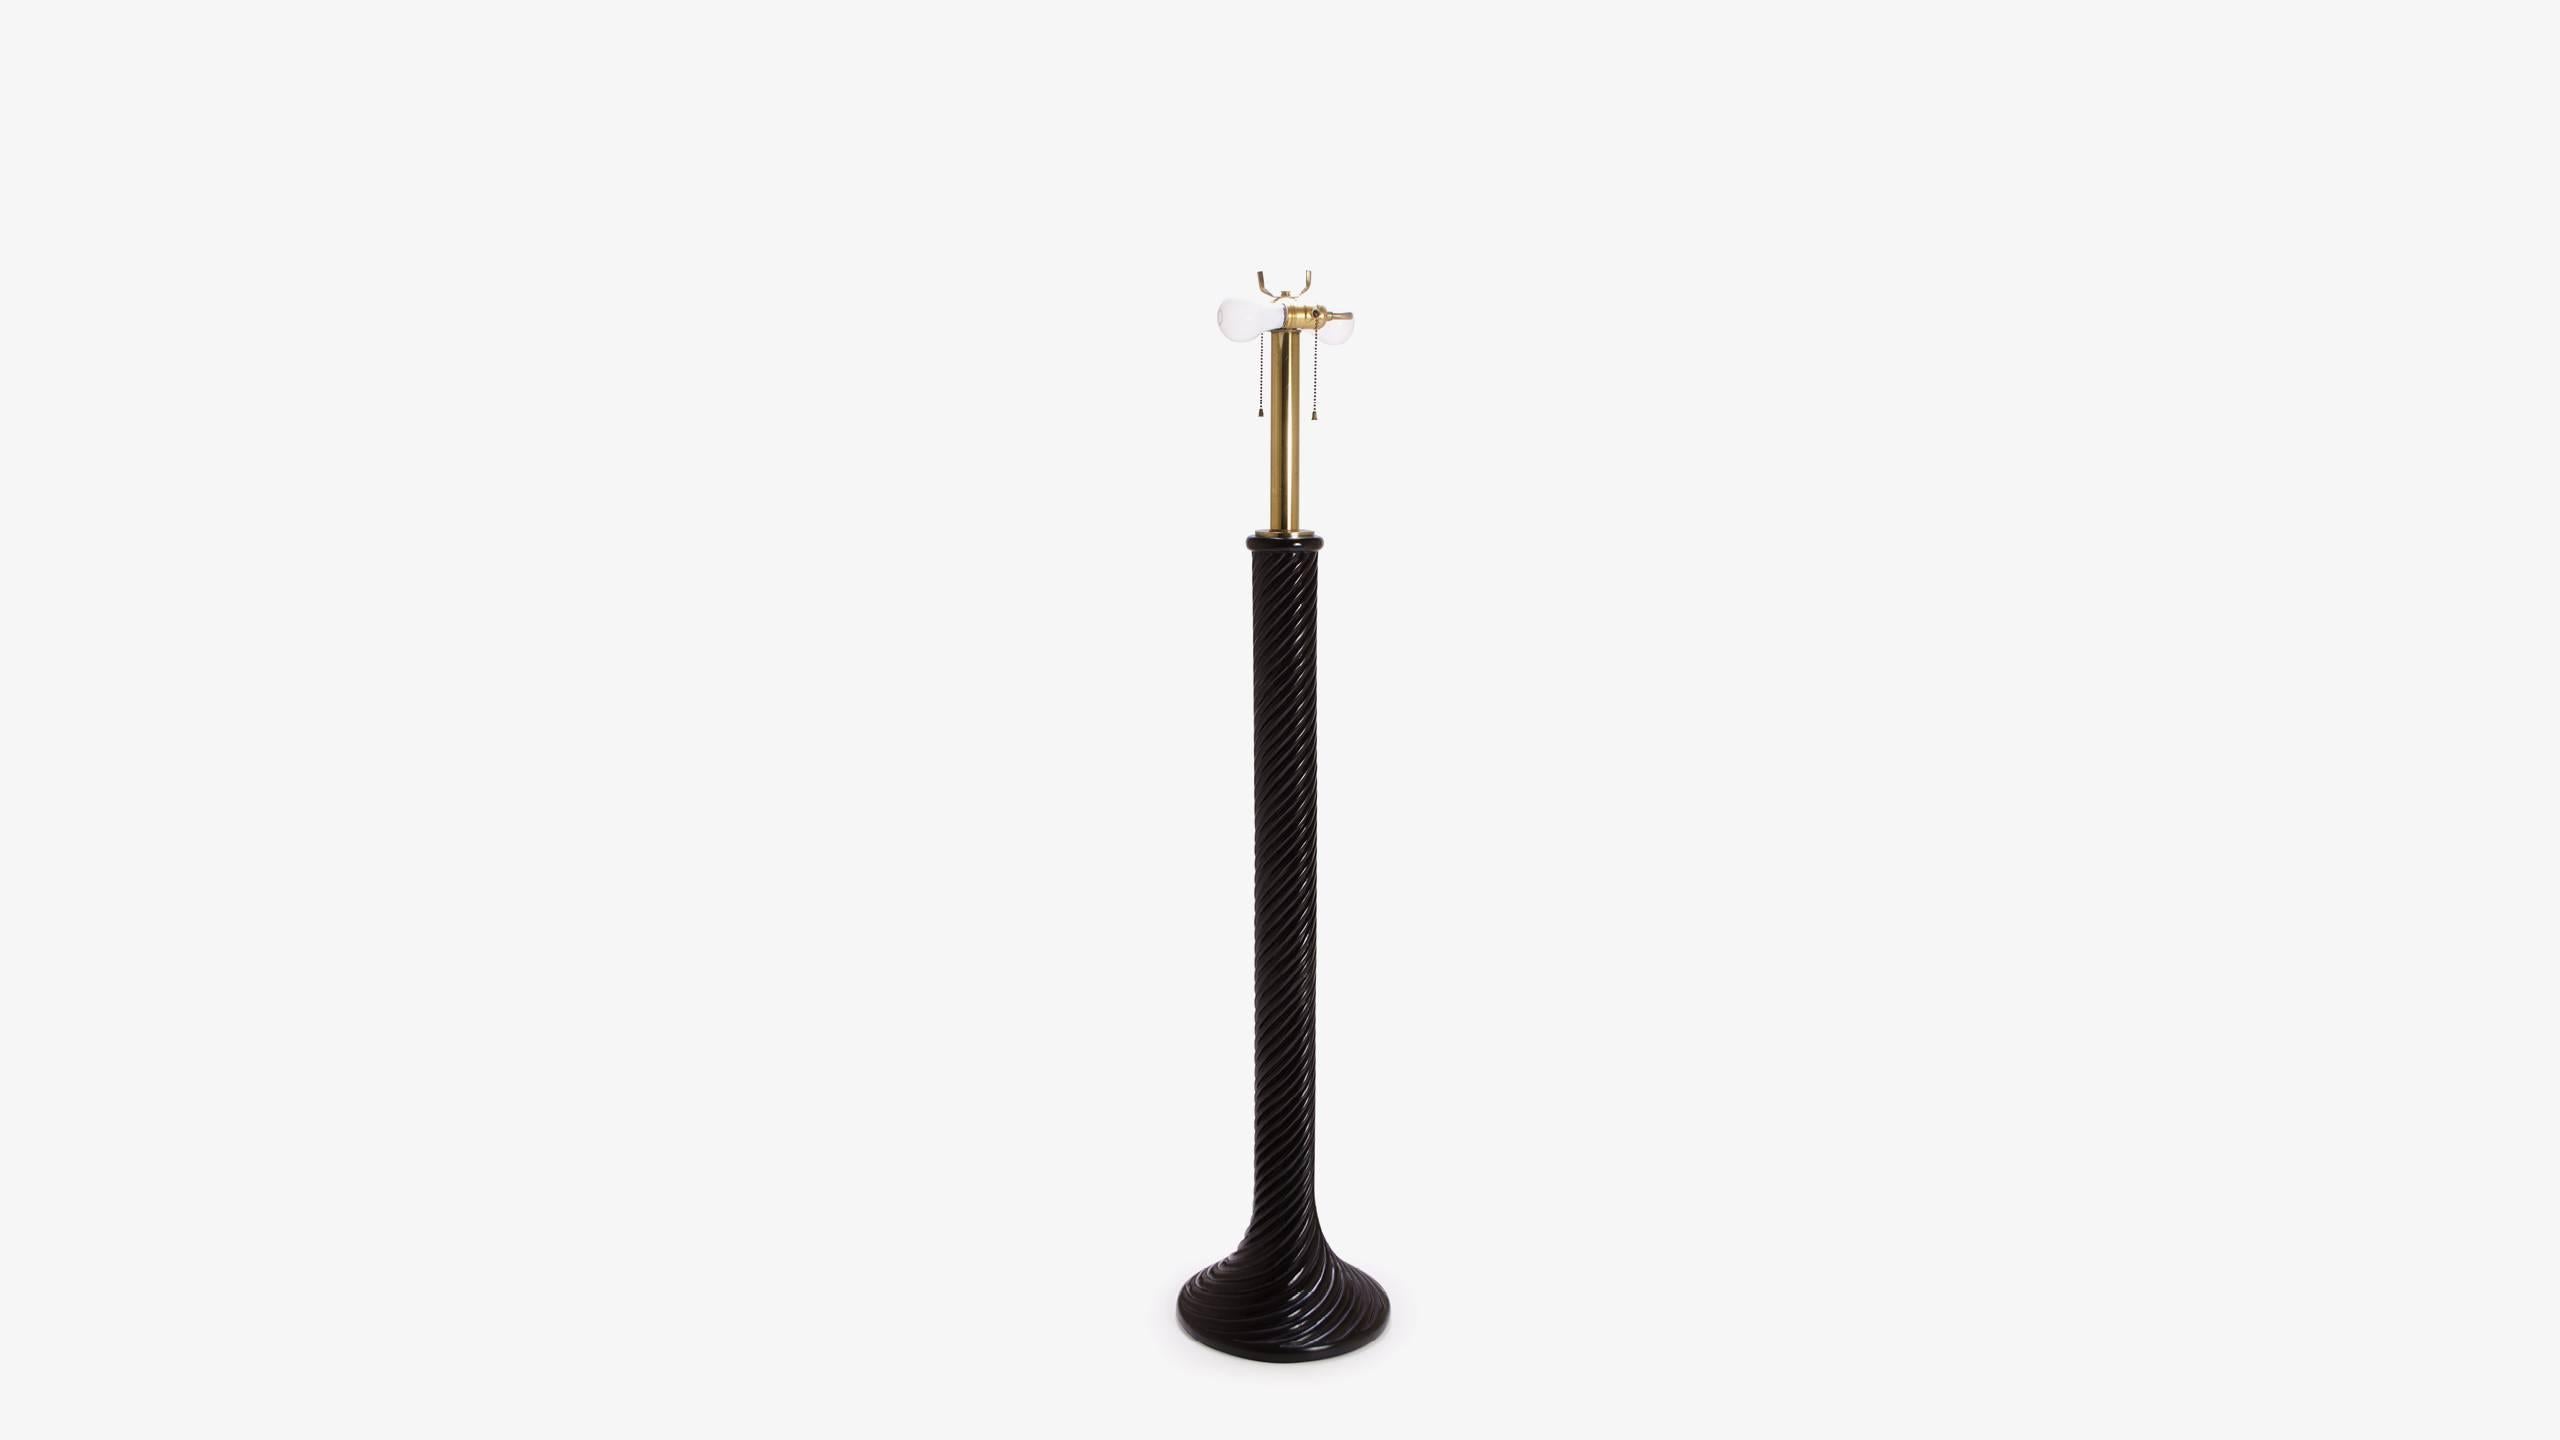 A great example of Hollywood design with ebonized resin in the Classic swirl motif common for the era. Starting from it's flared base, the floor lamp twirls upwards with its glossy ebony resin finish to meet brass hardware. The lamp is equipped with